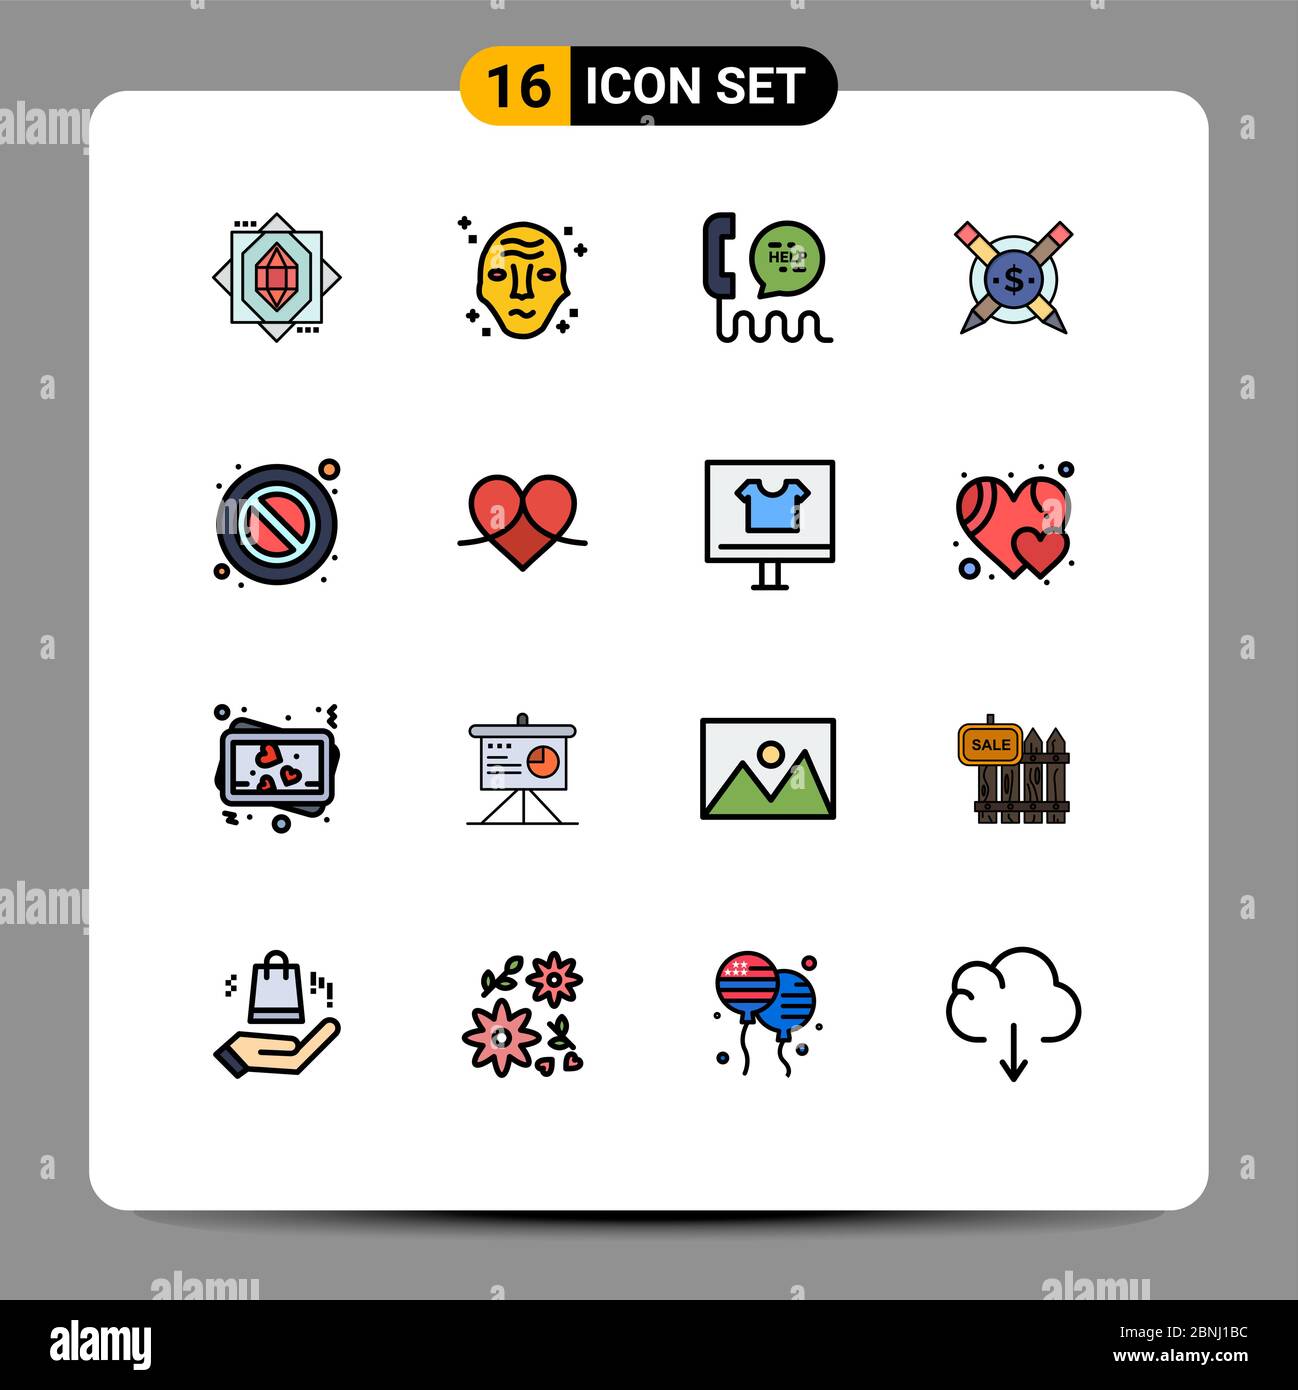 Set of 16 Modern UI Icons Symbols Signs for forbidden, paid articales, call, articales, help Editable Creative Vector Design Elements Stock Vector